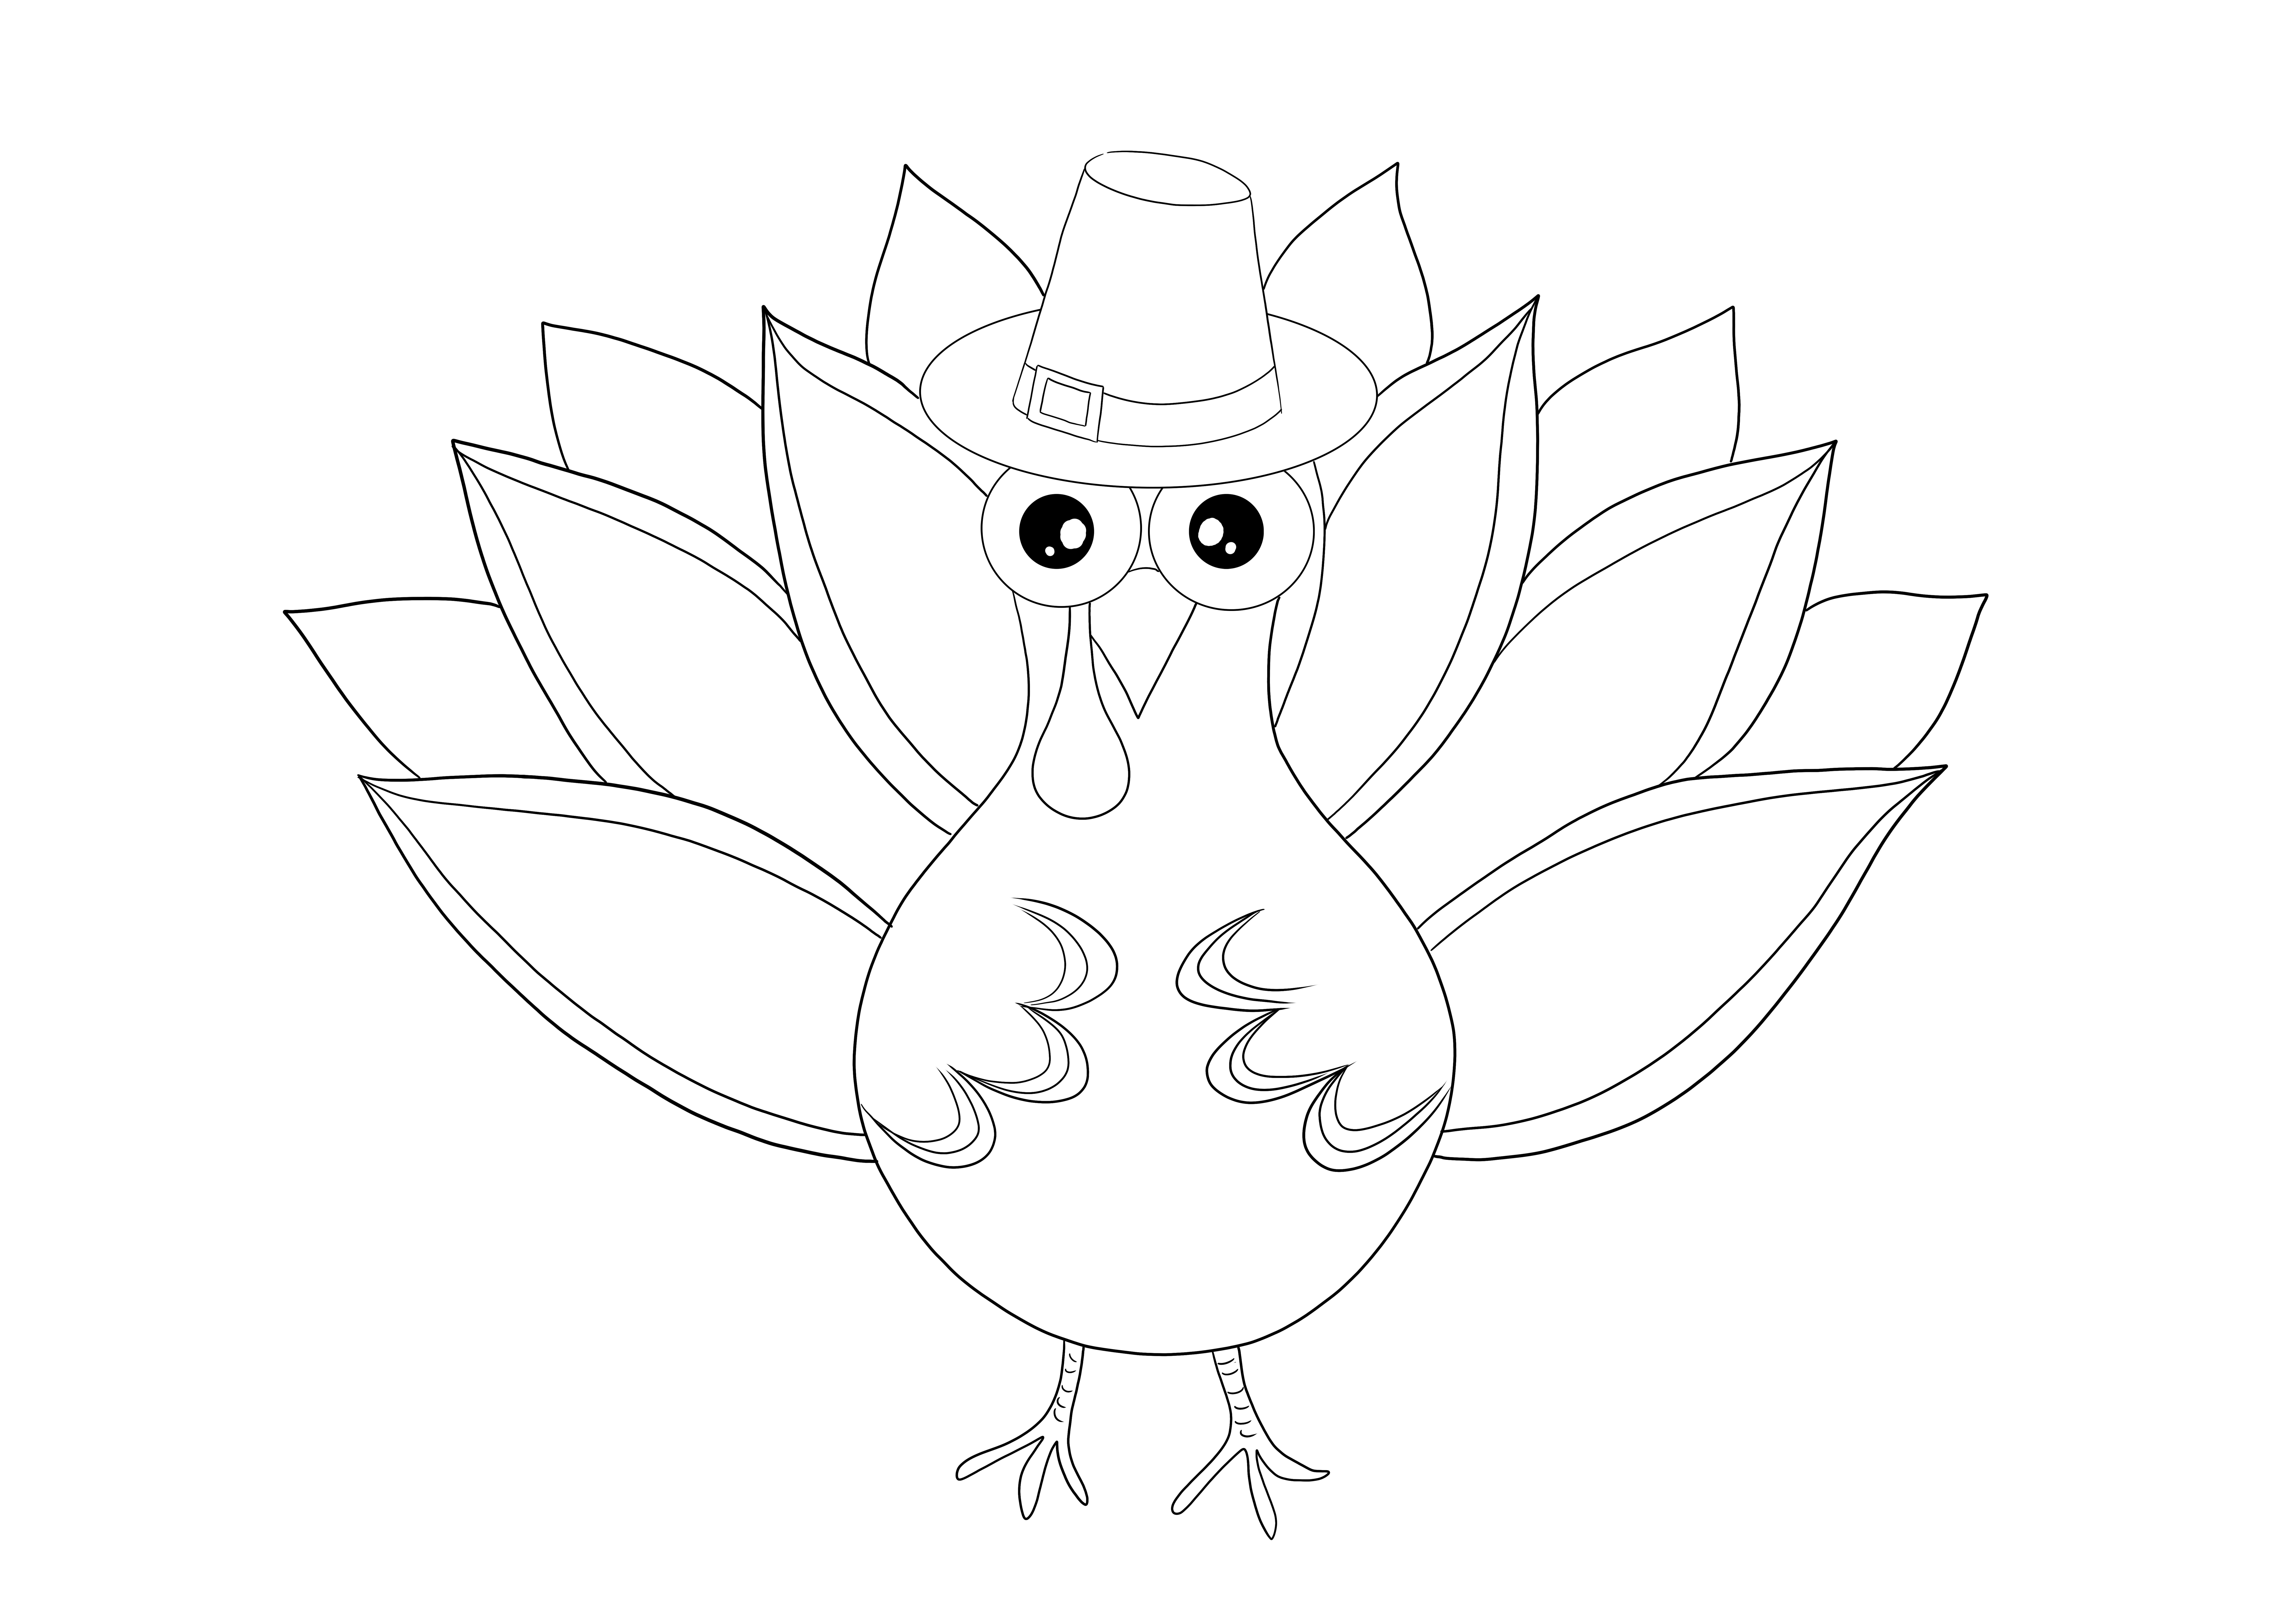 Funky turkey for Thanksgiving free coloring page to print or save for later